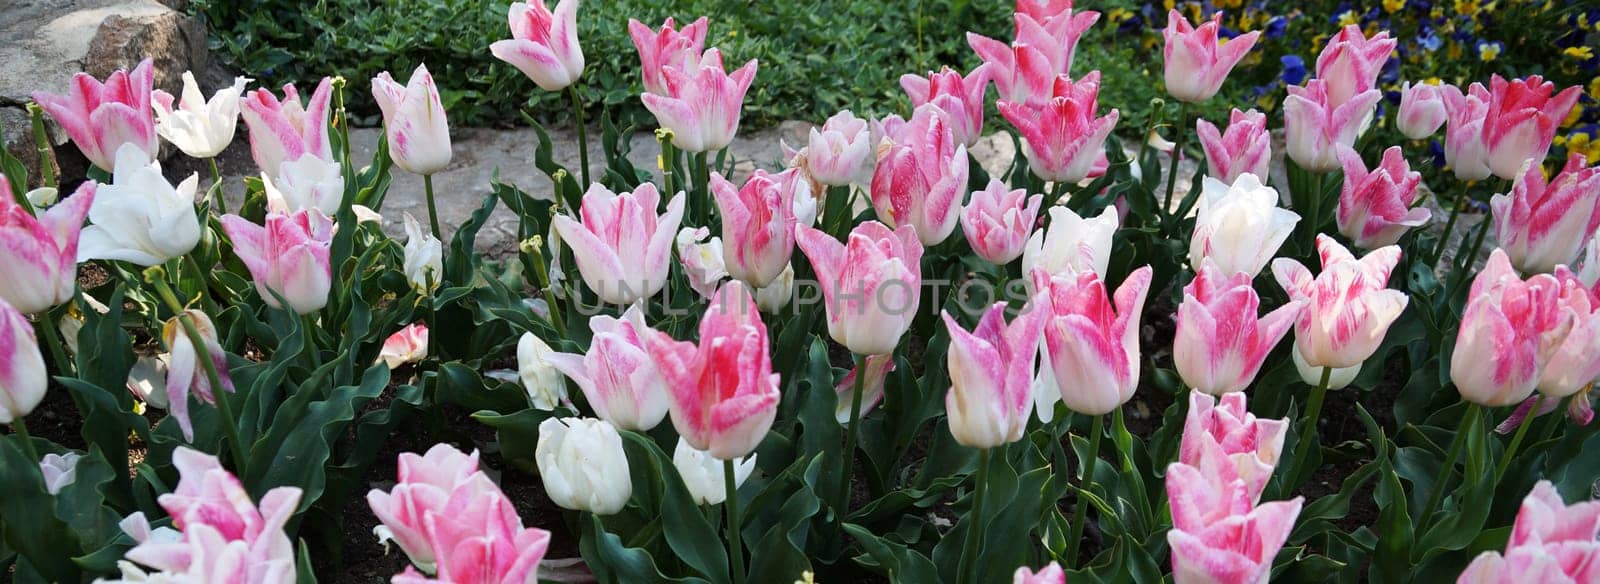 Blooming soft pink tulips Holland chic for horizontal spring background.